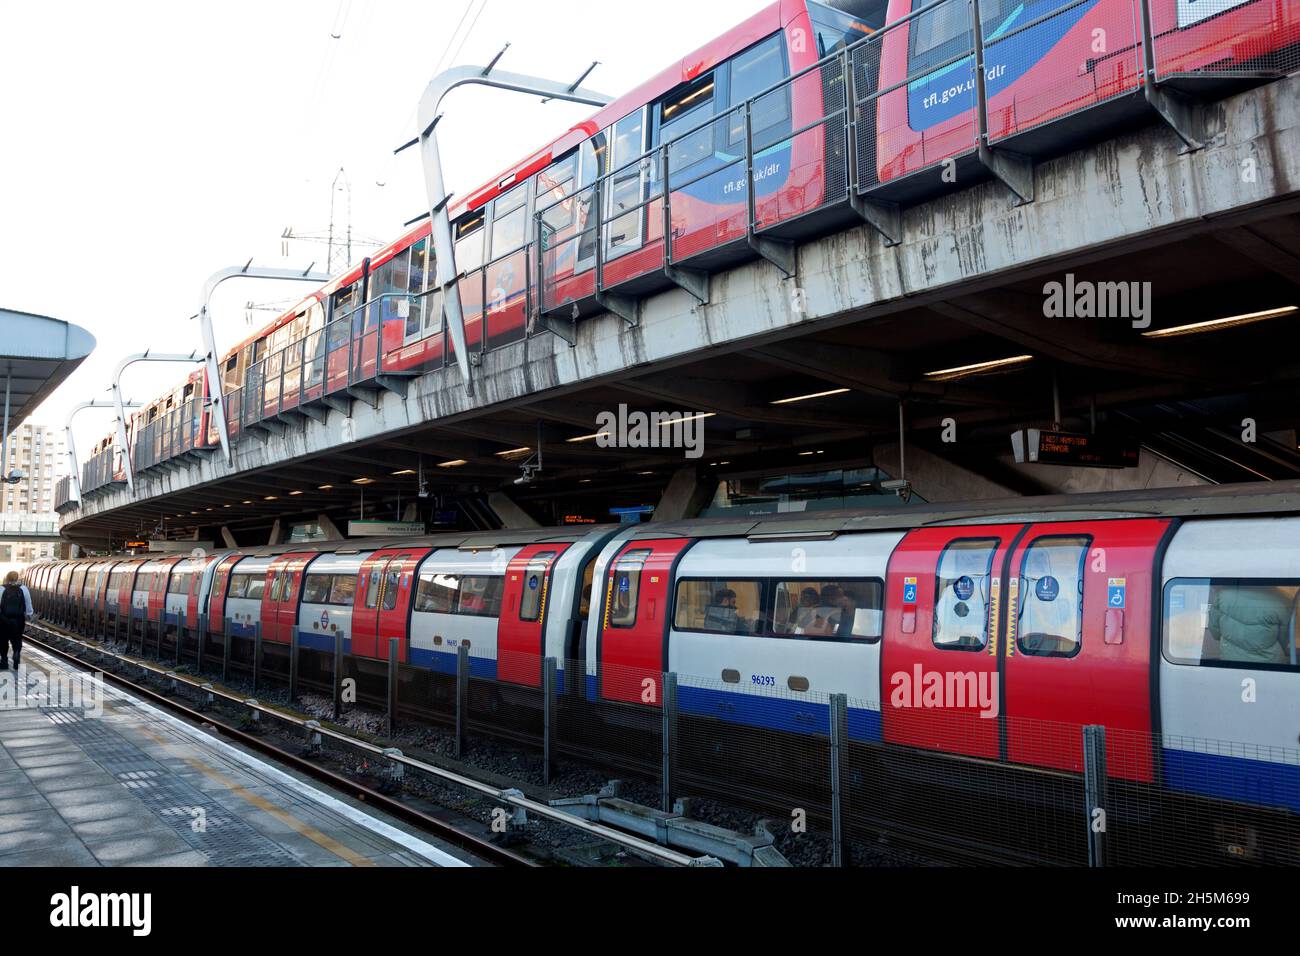 Multi-level platforms at Canning Town station for Docklands Light Railway and Underground, London Stock Photo